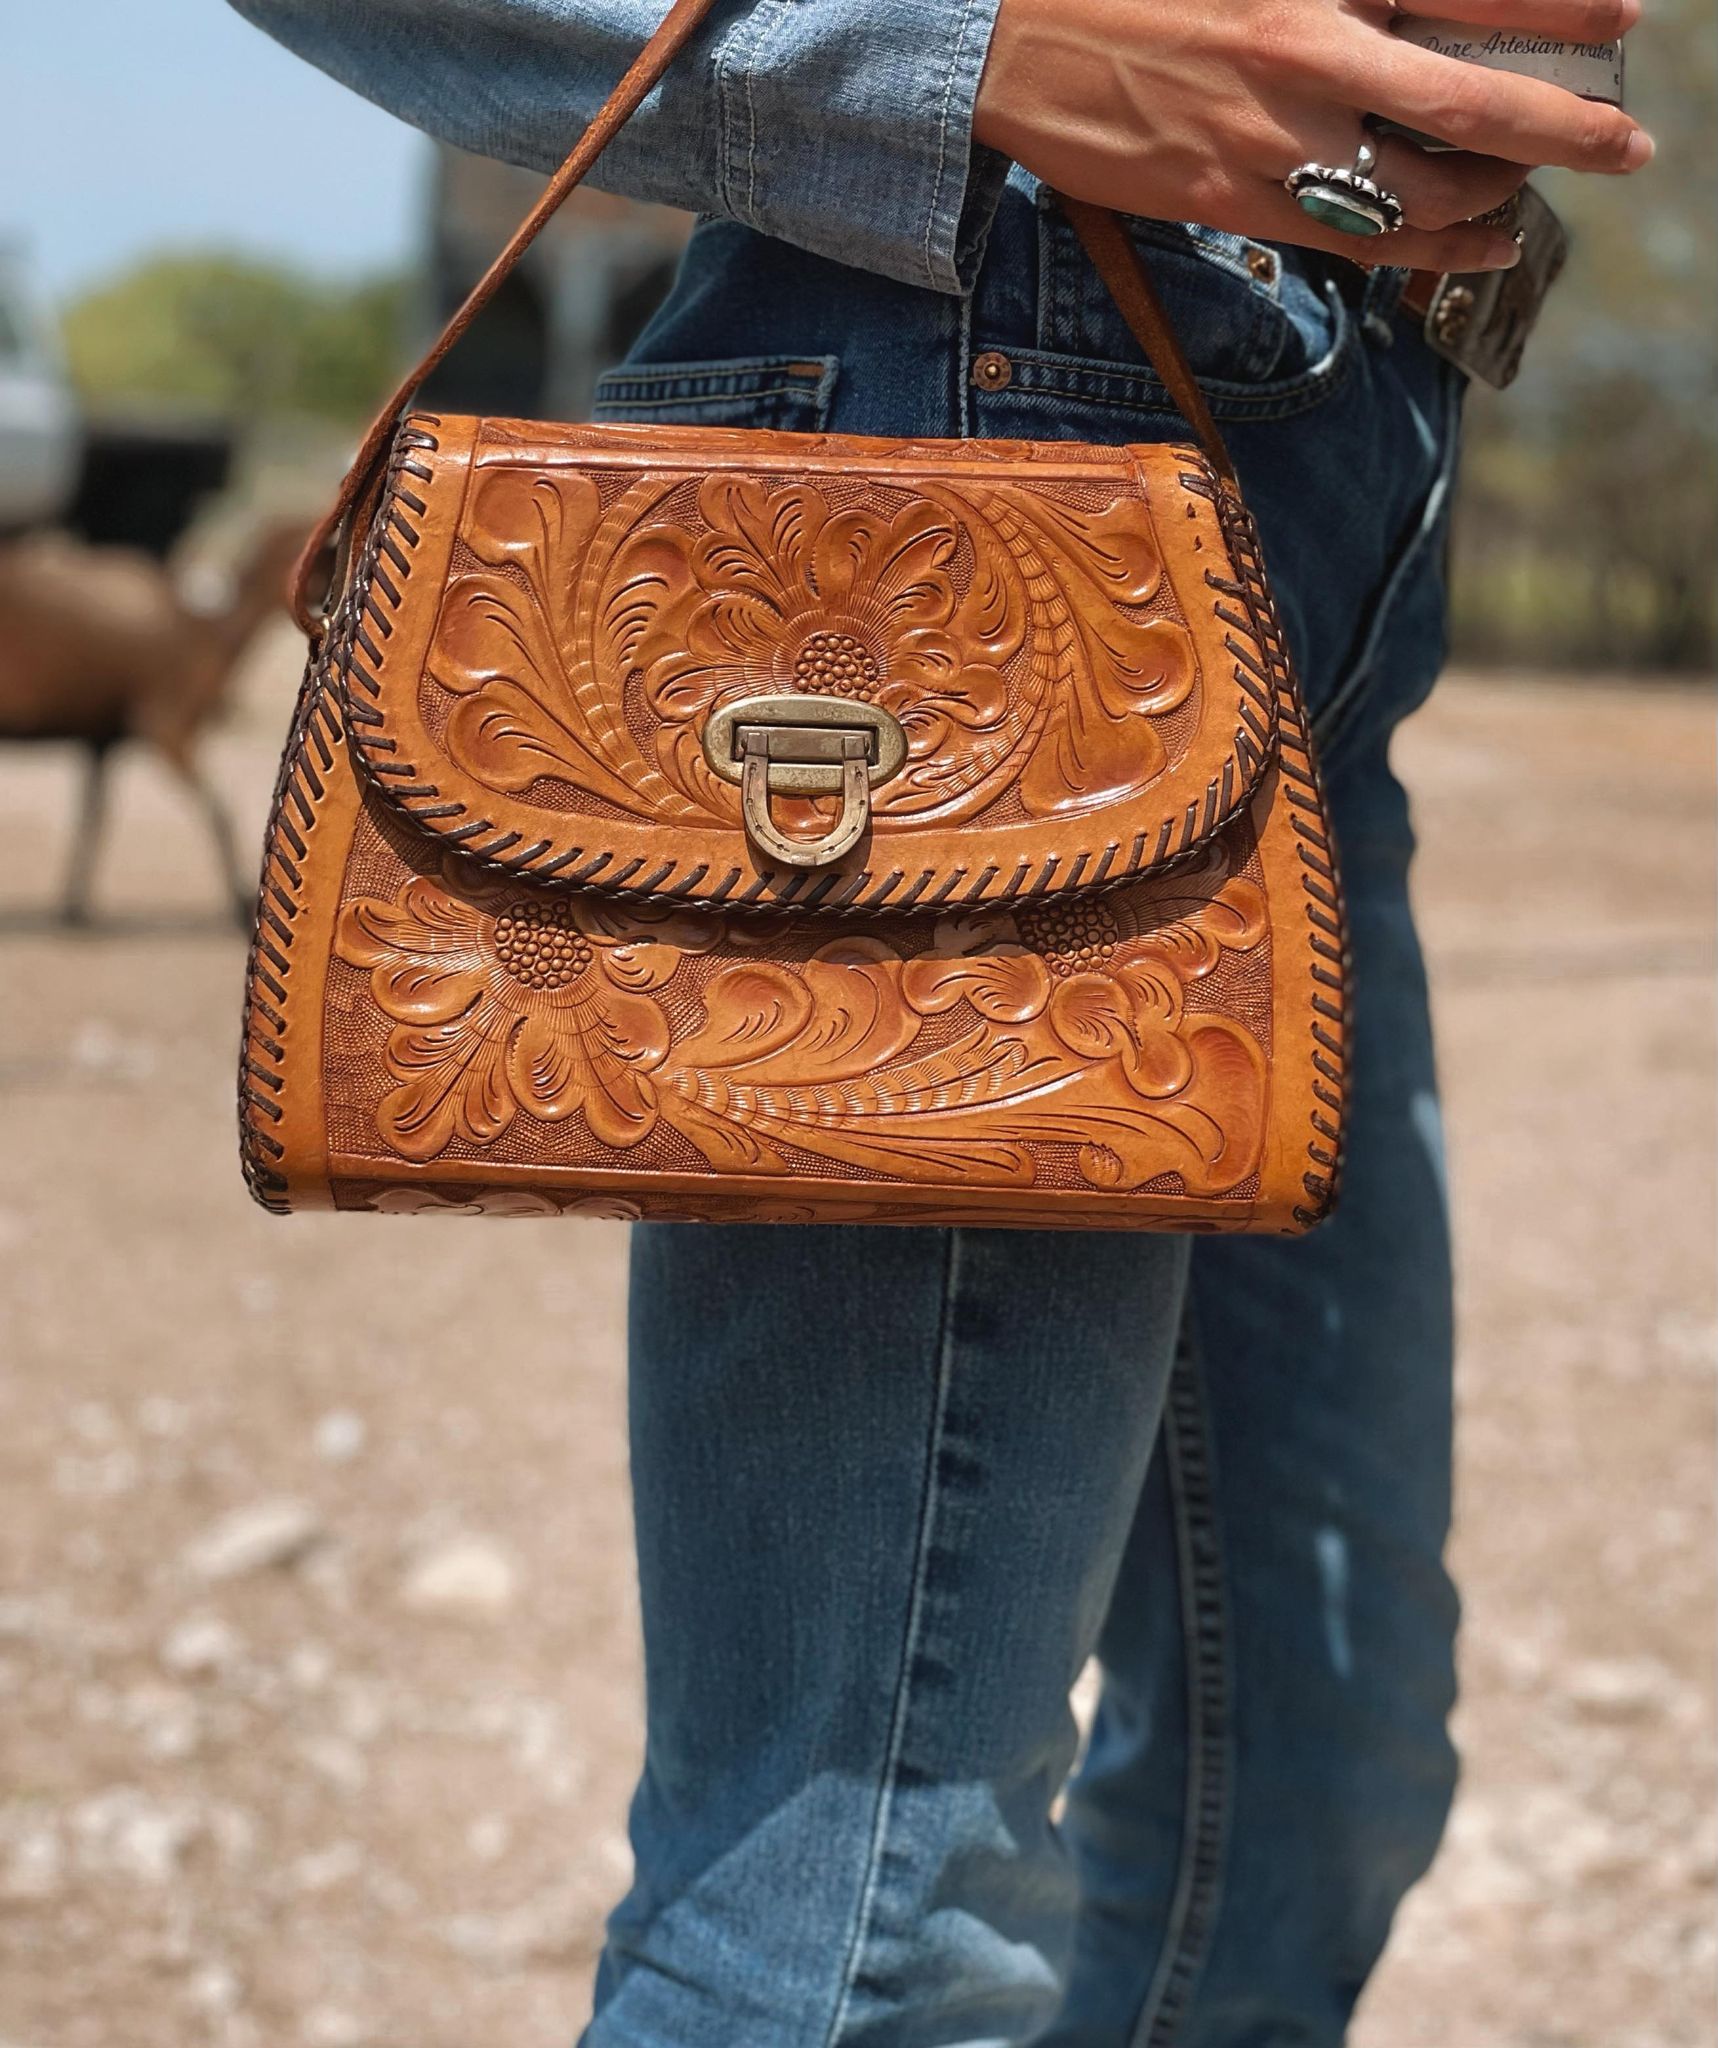 Western Belt Type Concho Purse Style Country Shoulder Hand Bag - Etsy